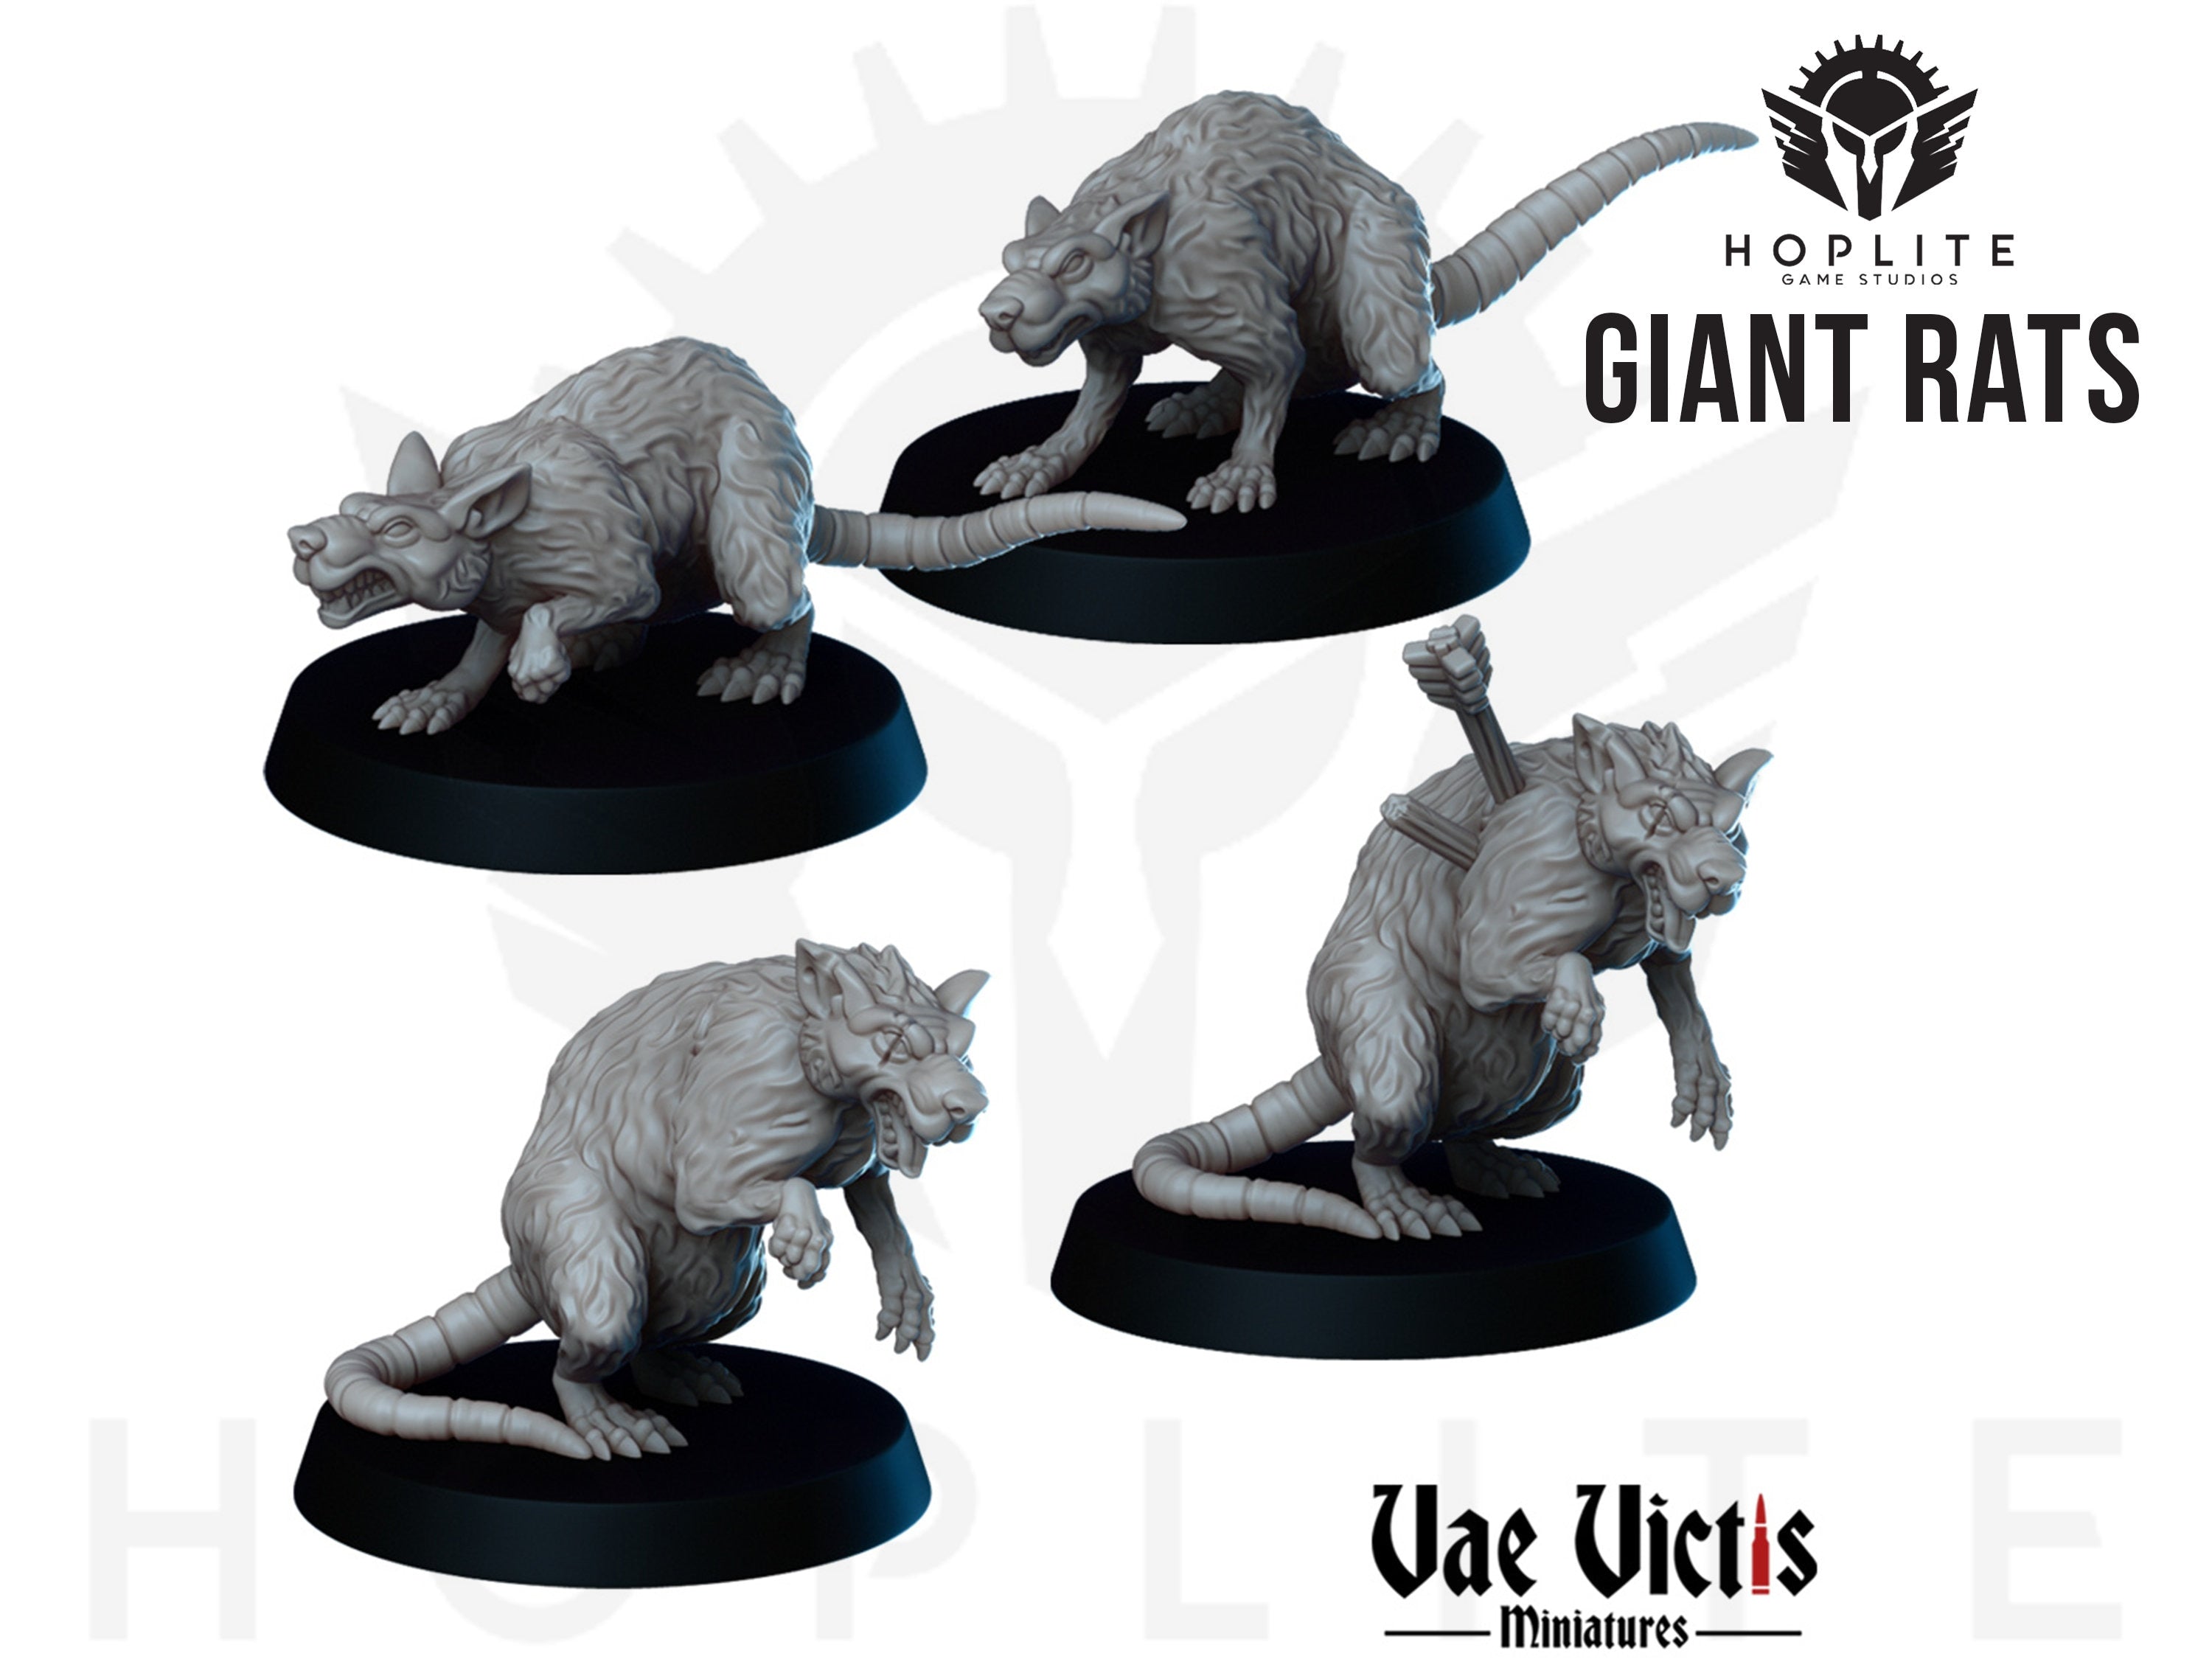 Giant Rats!